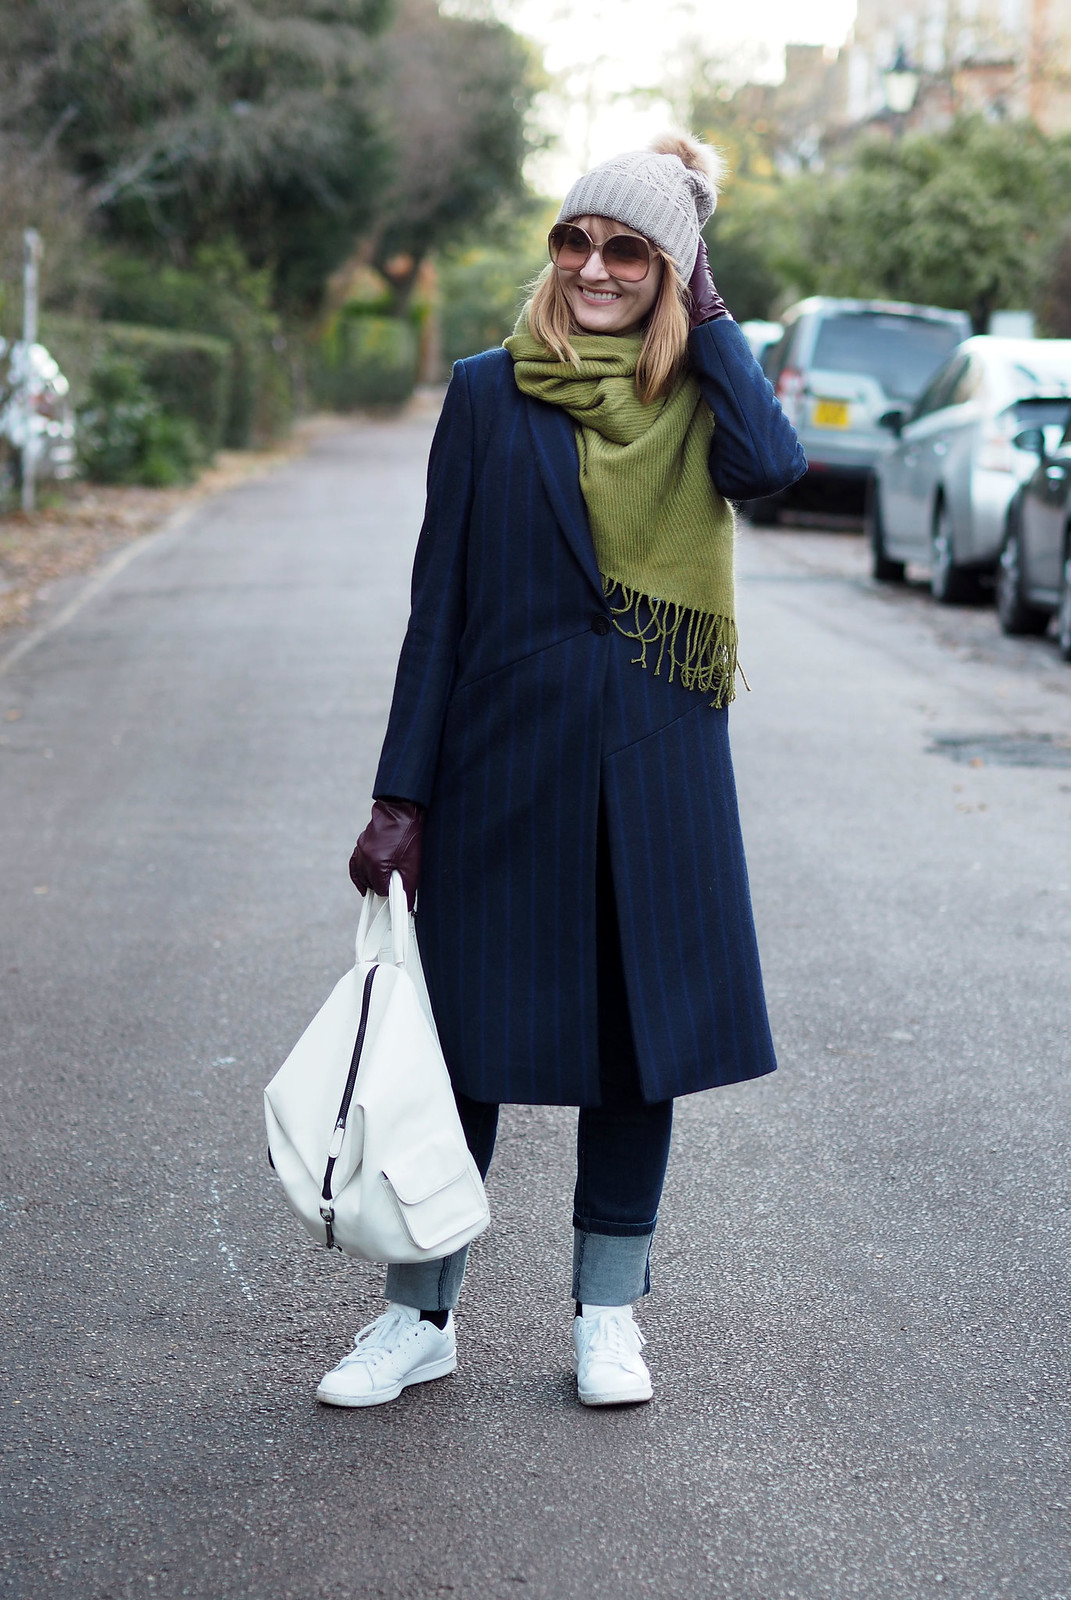 Smart cold weather layered outfit navy pinstripe wool coat moss green wool scarf bobble hat white backpack and Adidas Stan Smiths deep hem straight leg jeans | Not Dressed As Lamb, over 40 style